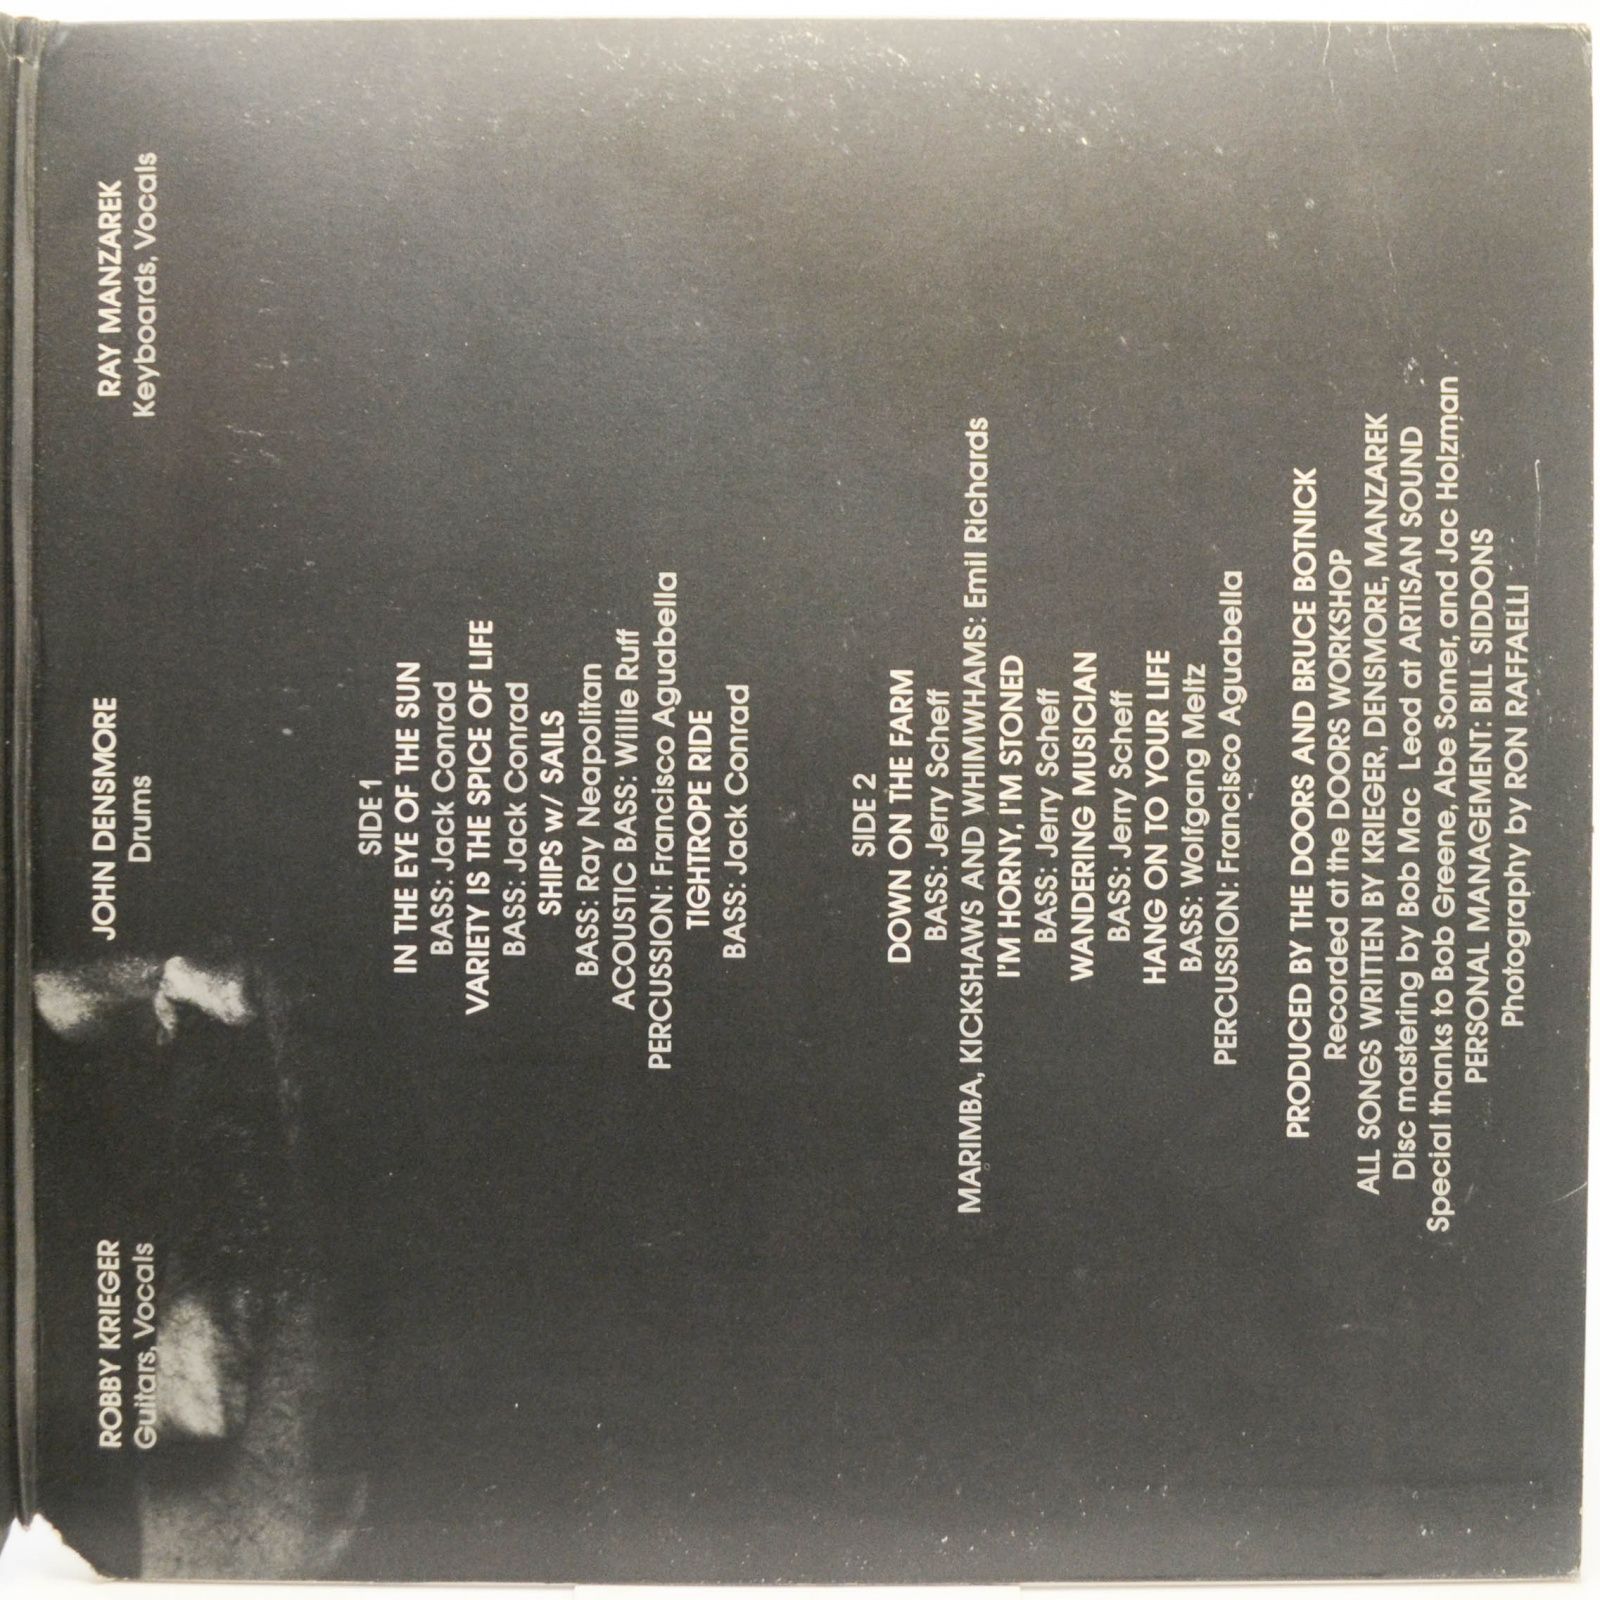 Doors — Other Voices (USA), 1971